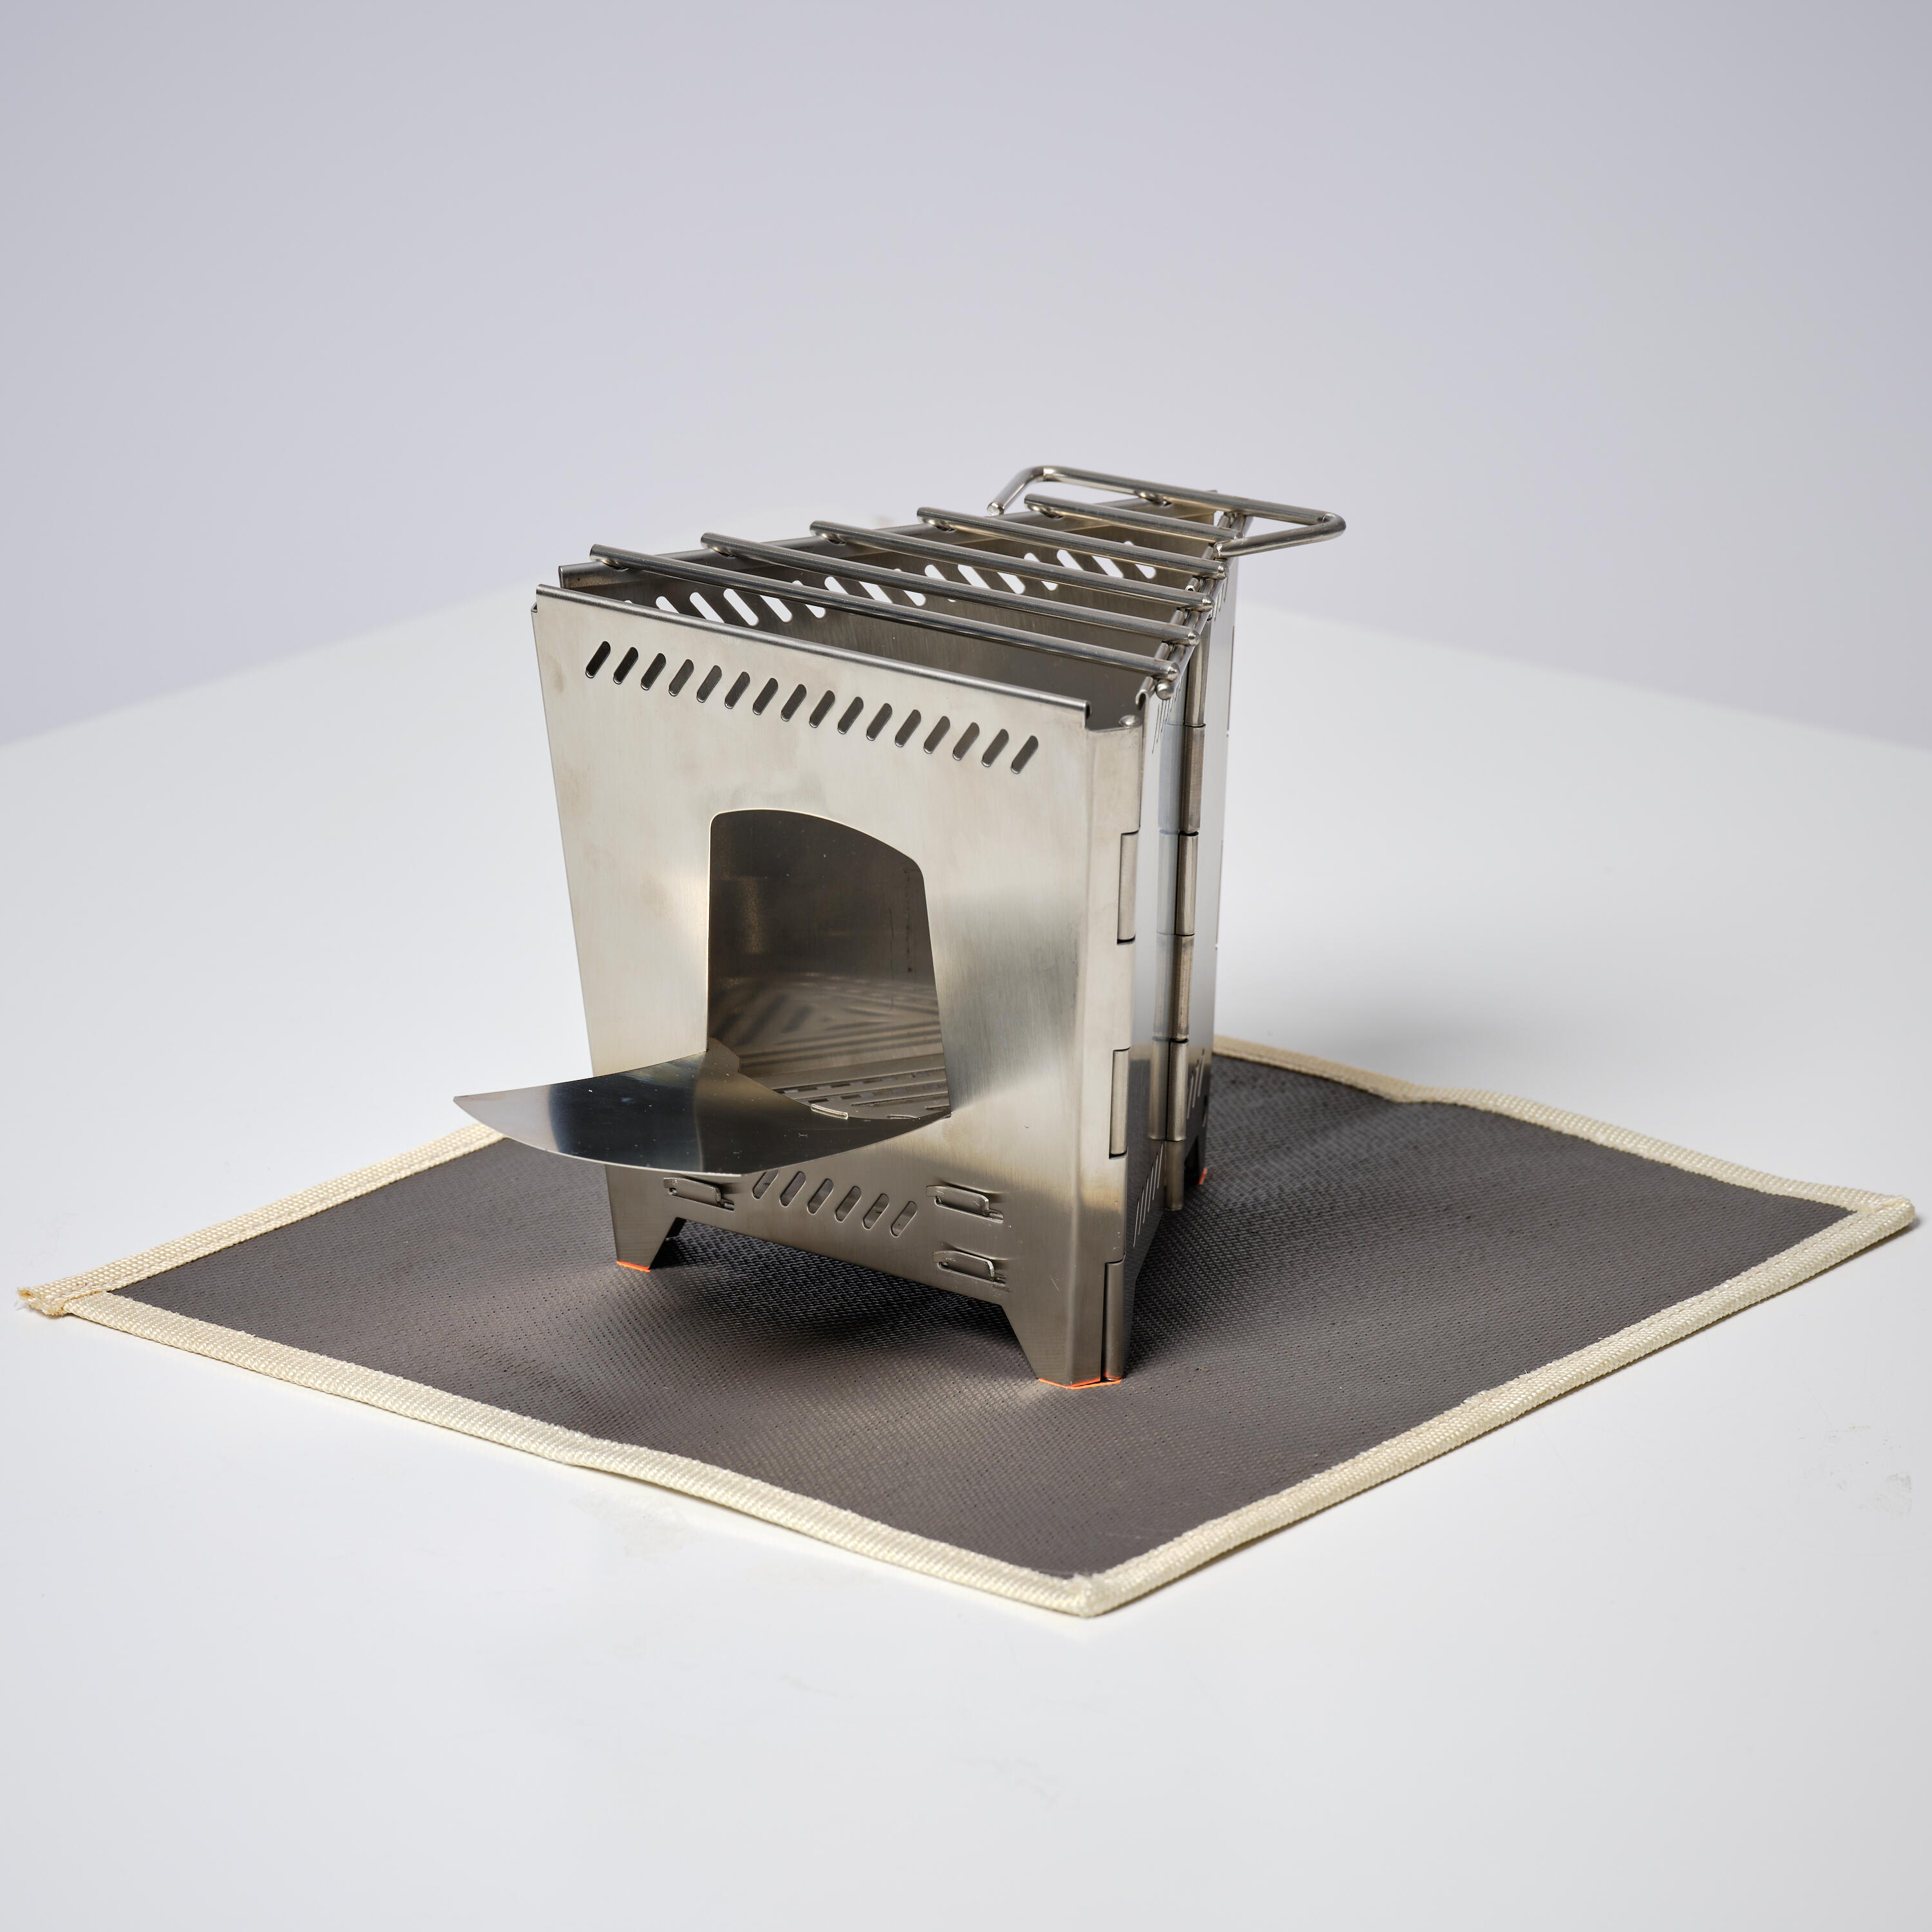 Image of Stainless Steel Wood-Burning Camping Stove - Bivouac Bushcraft